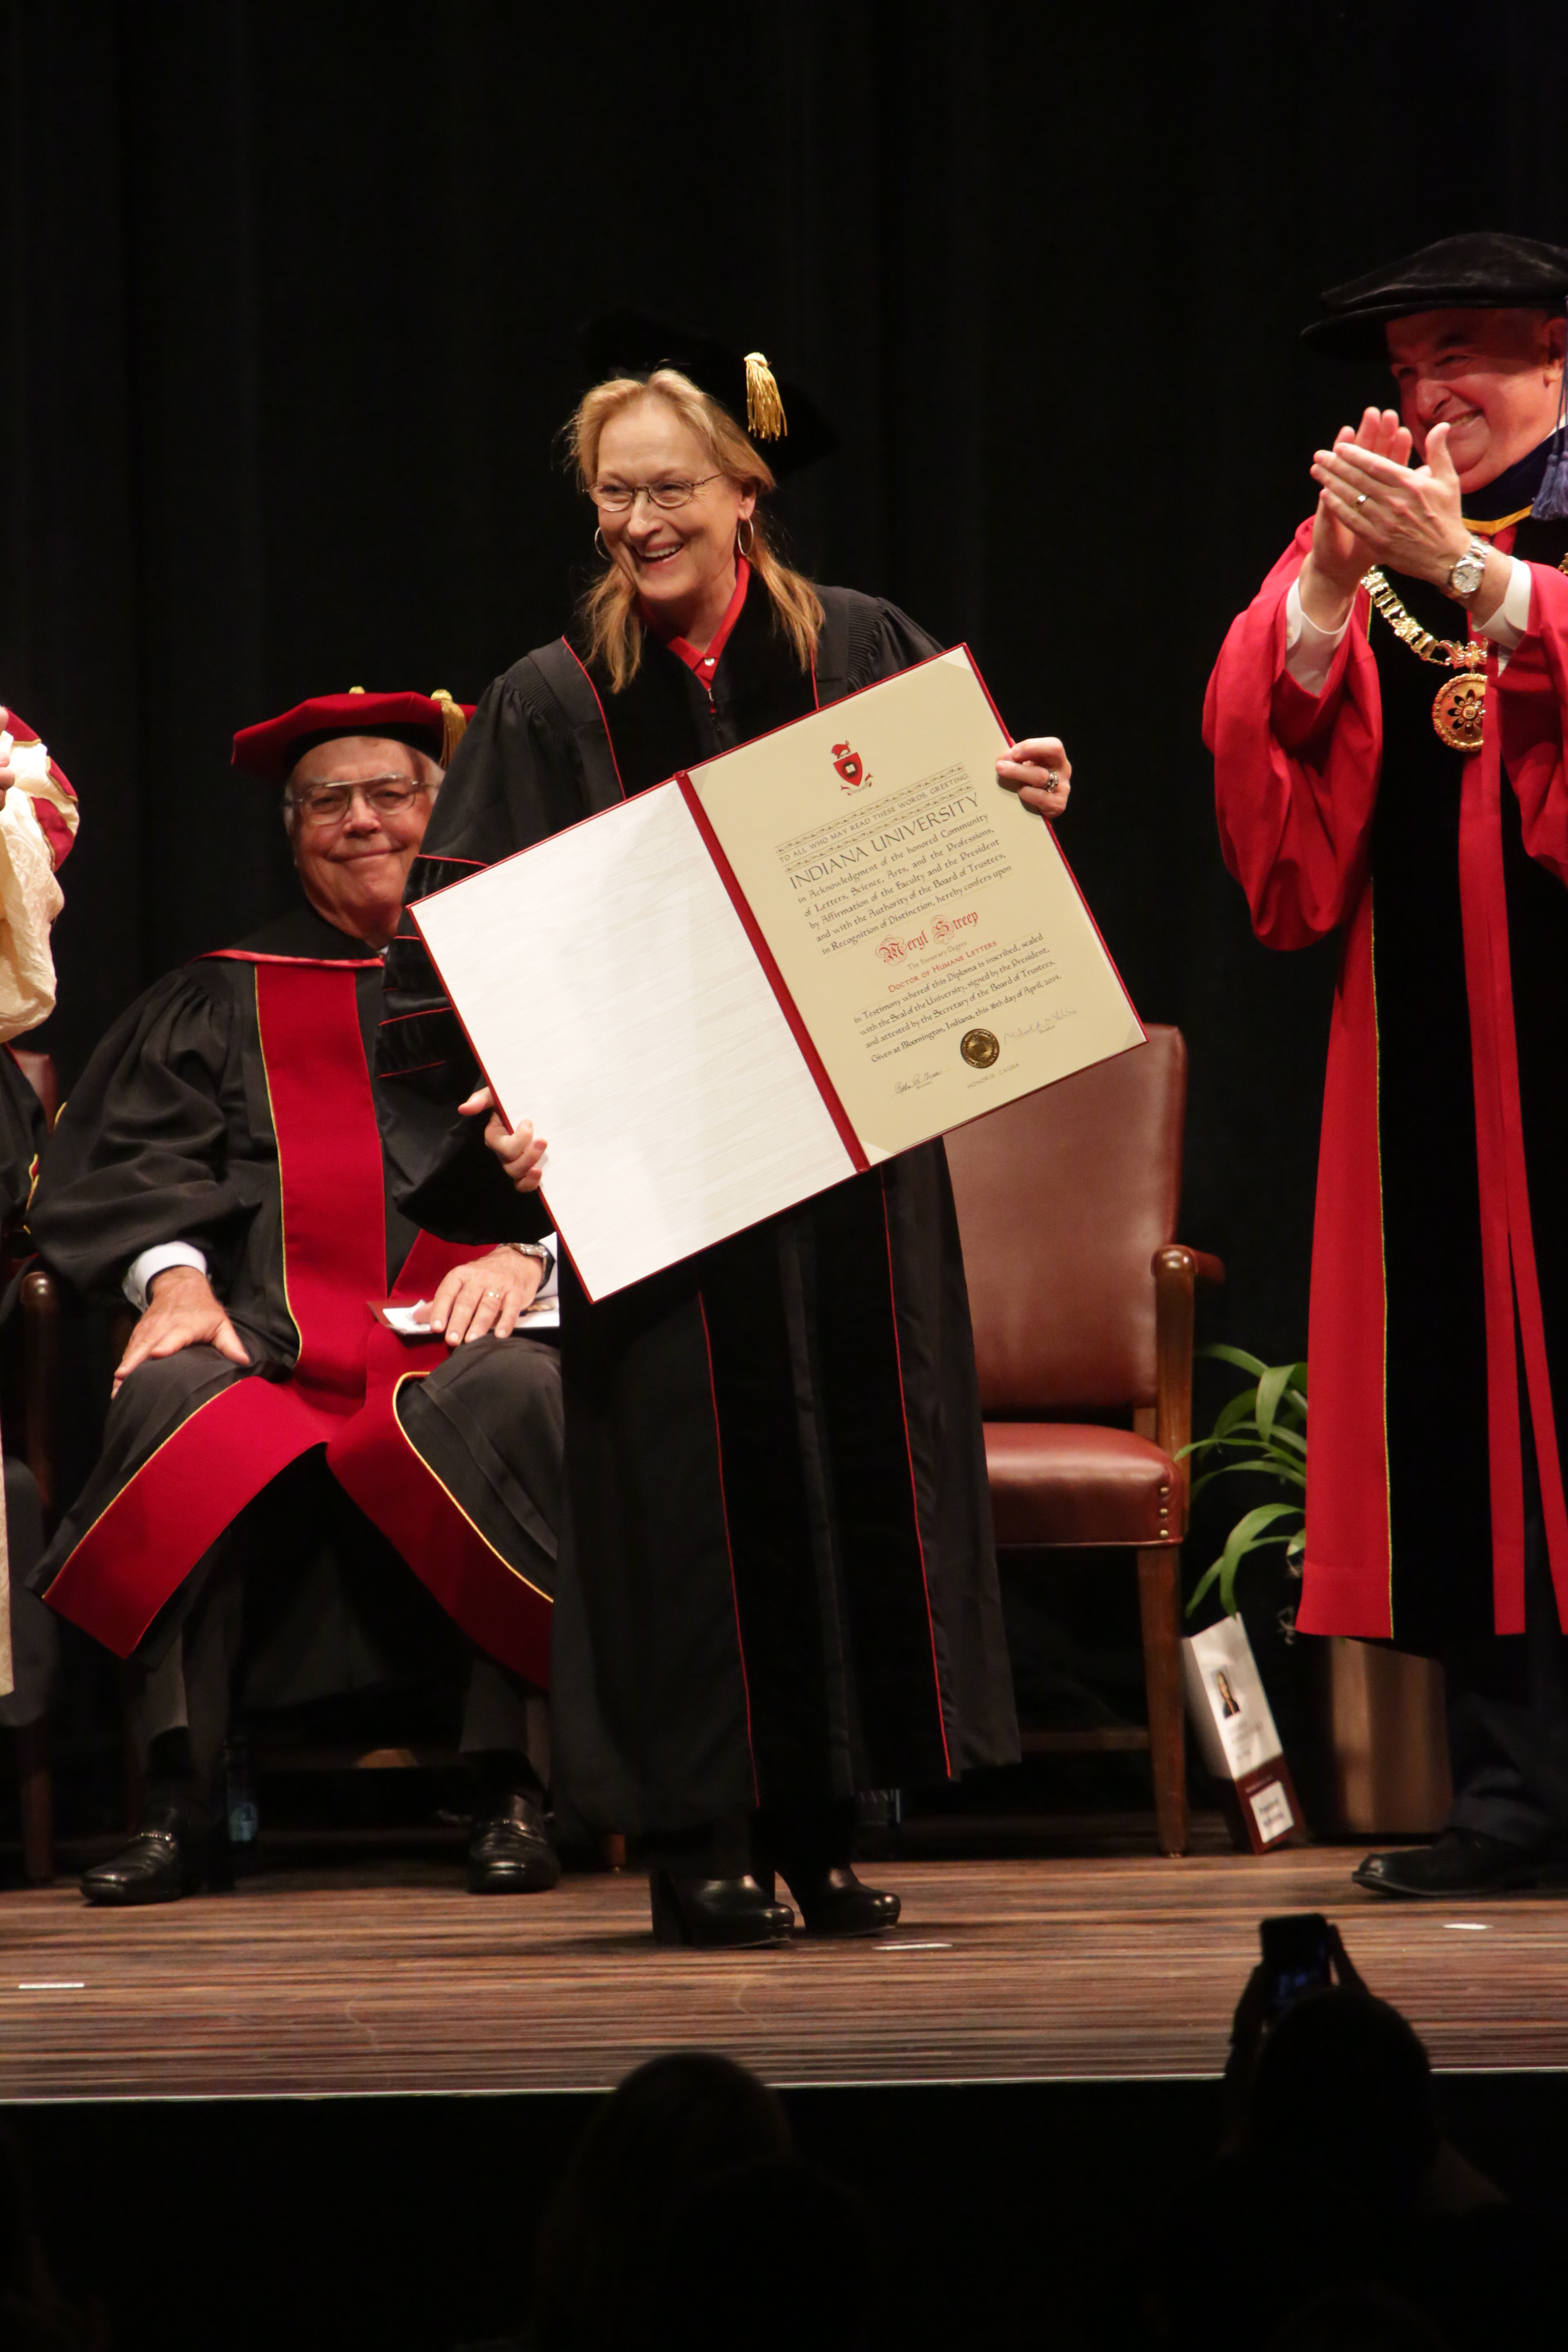 Meryl Streep receives a Conferral Honorary Degree from Indiana University on April 16, 2014 in Bloomington, Indiana. (Ron Hoskins—Getty Images)